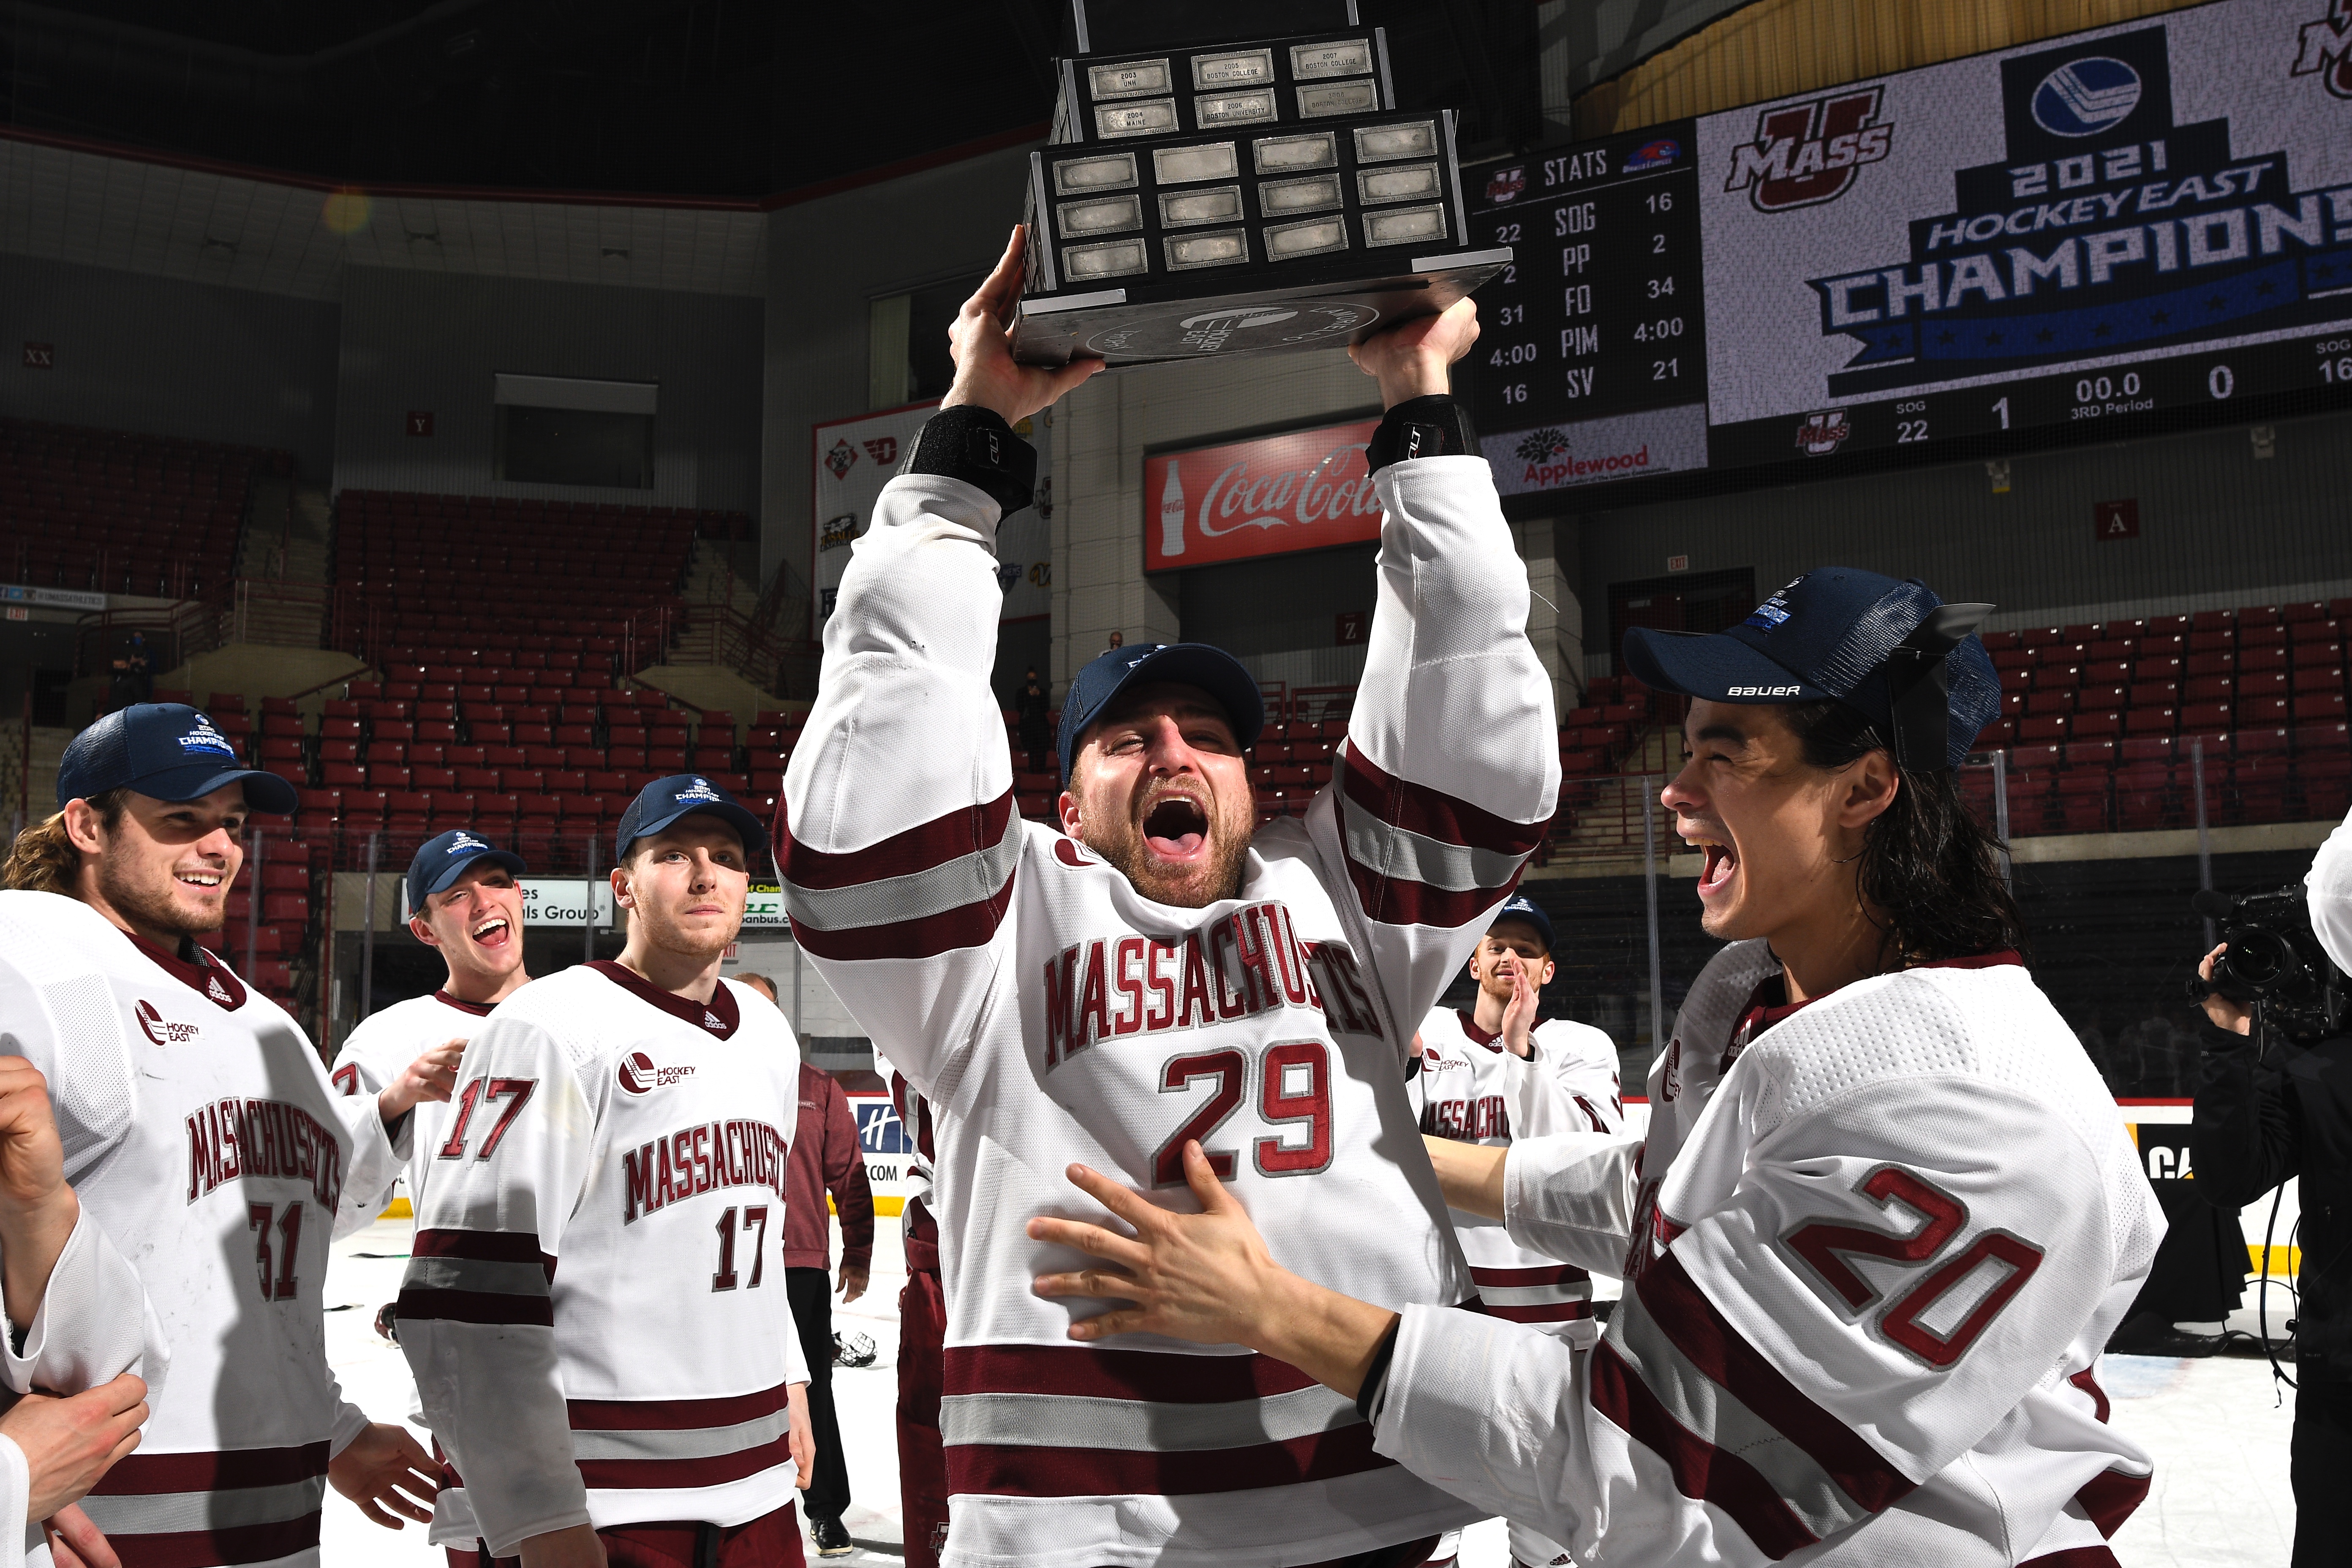 UMass, AIC in NCAA Hockey Tournament Live stream, TV channel, how to watch selection show (Sunday., March 21)